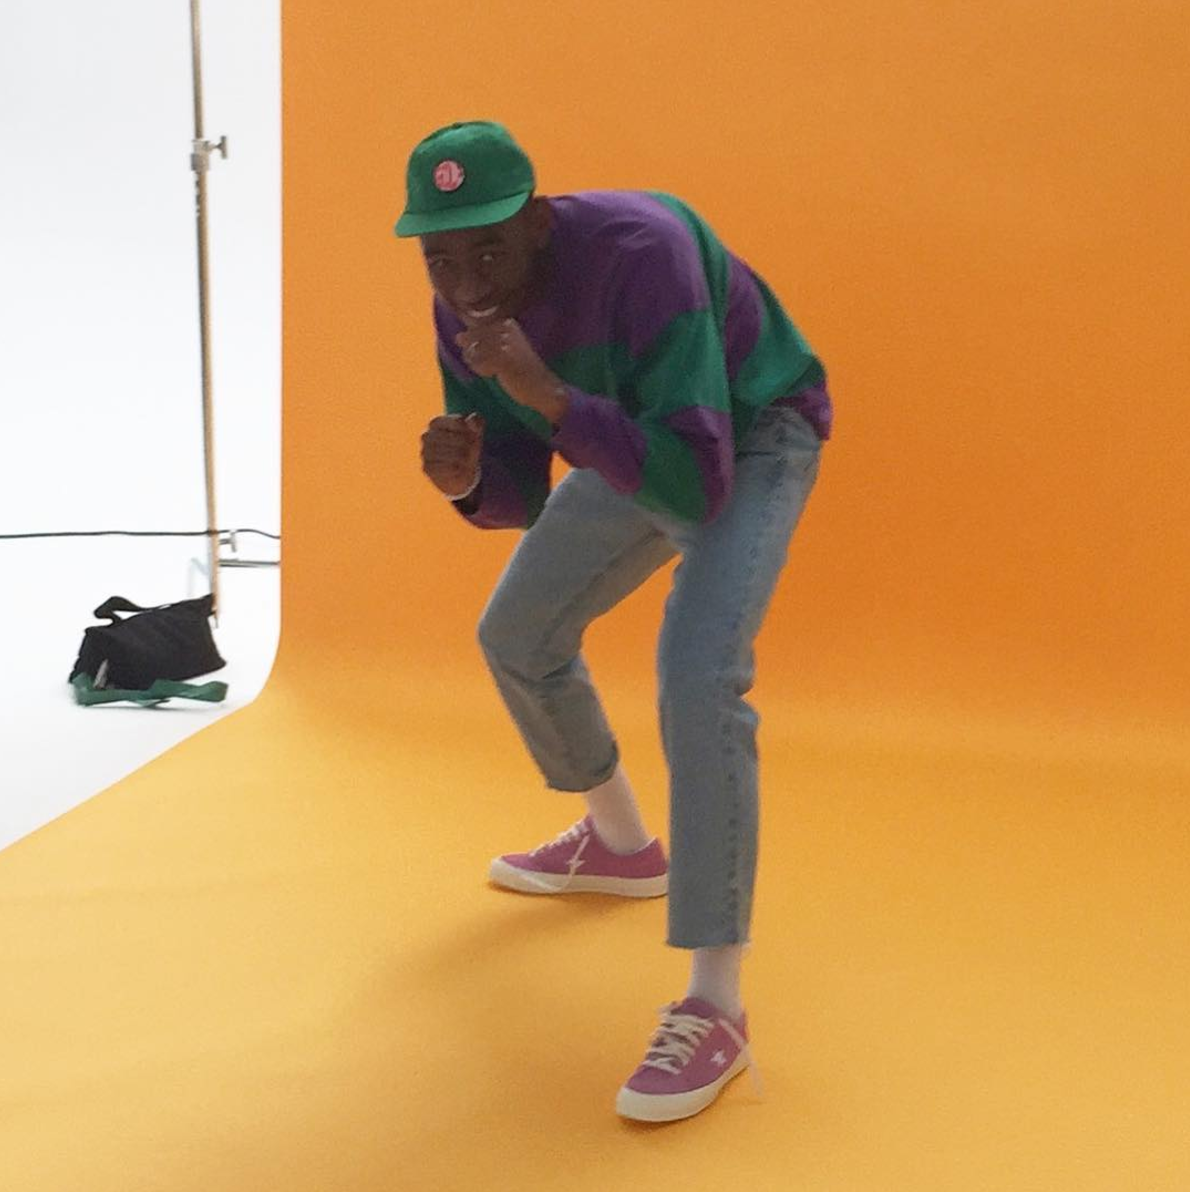 what converse does tyler the creator wear